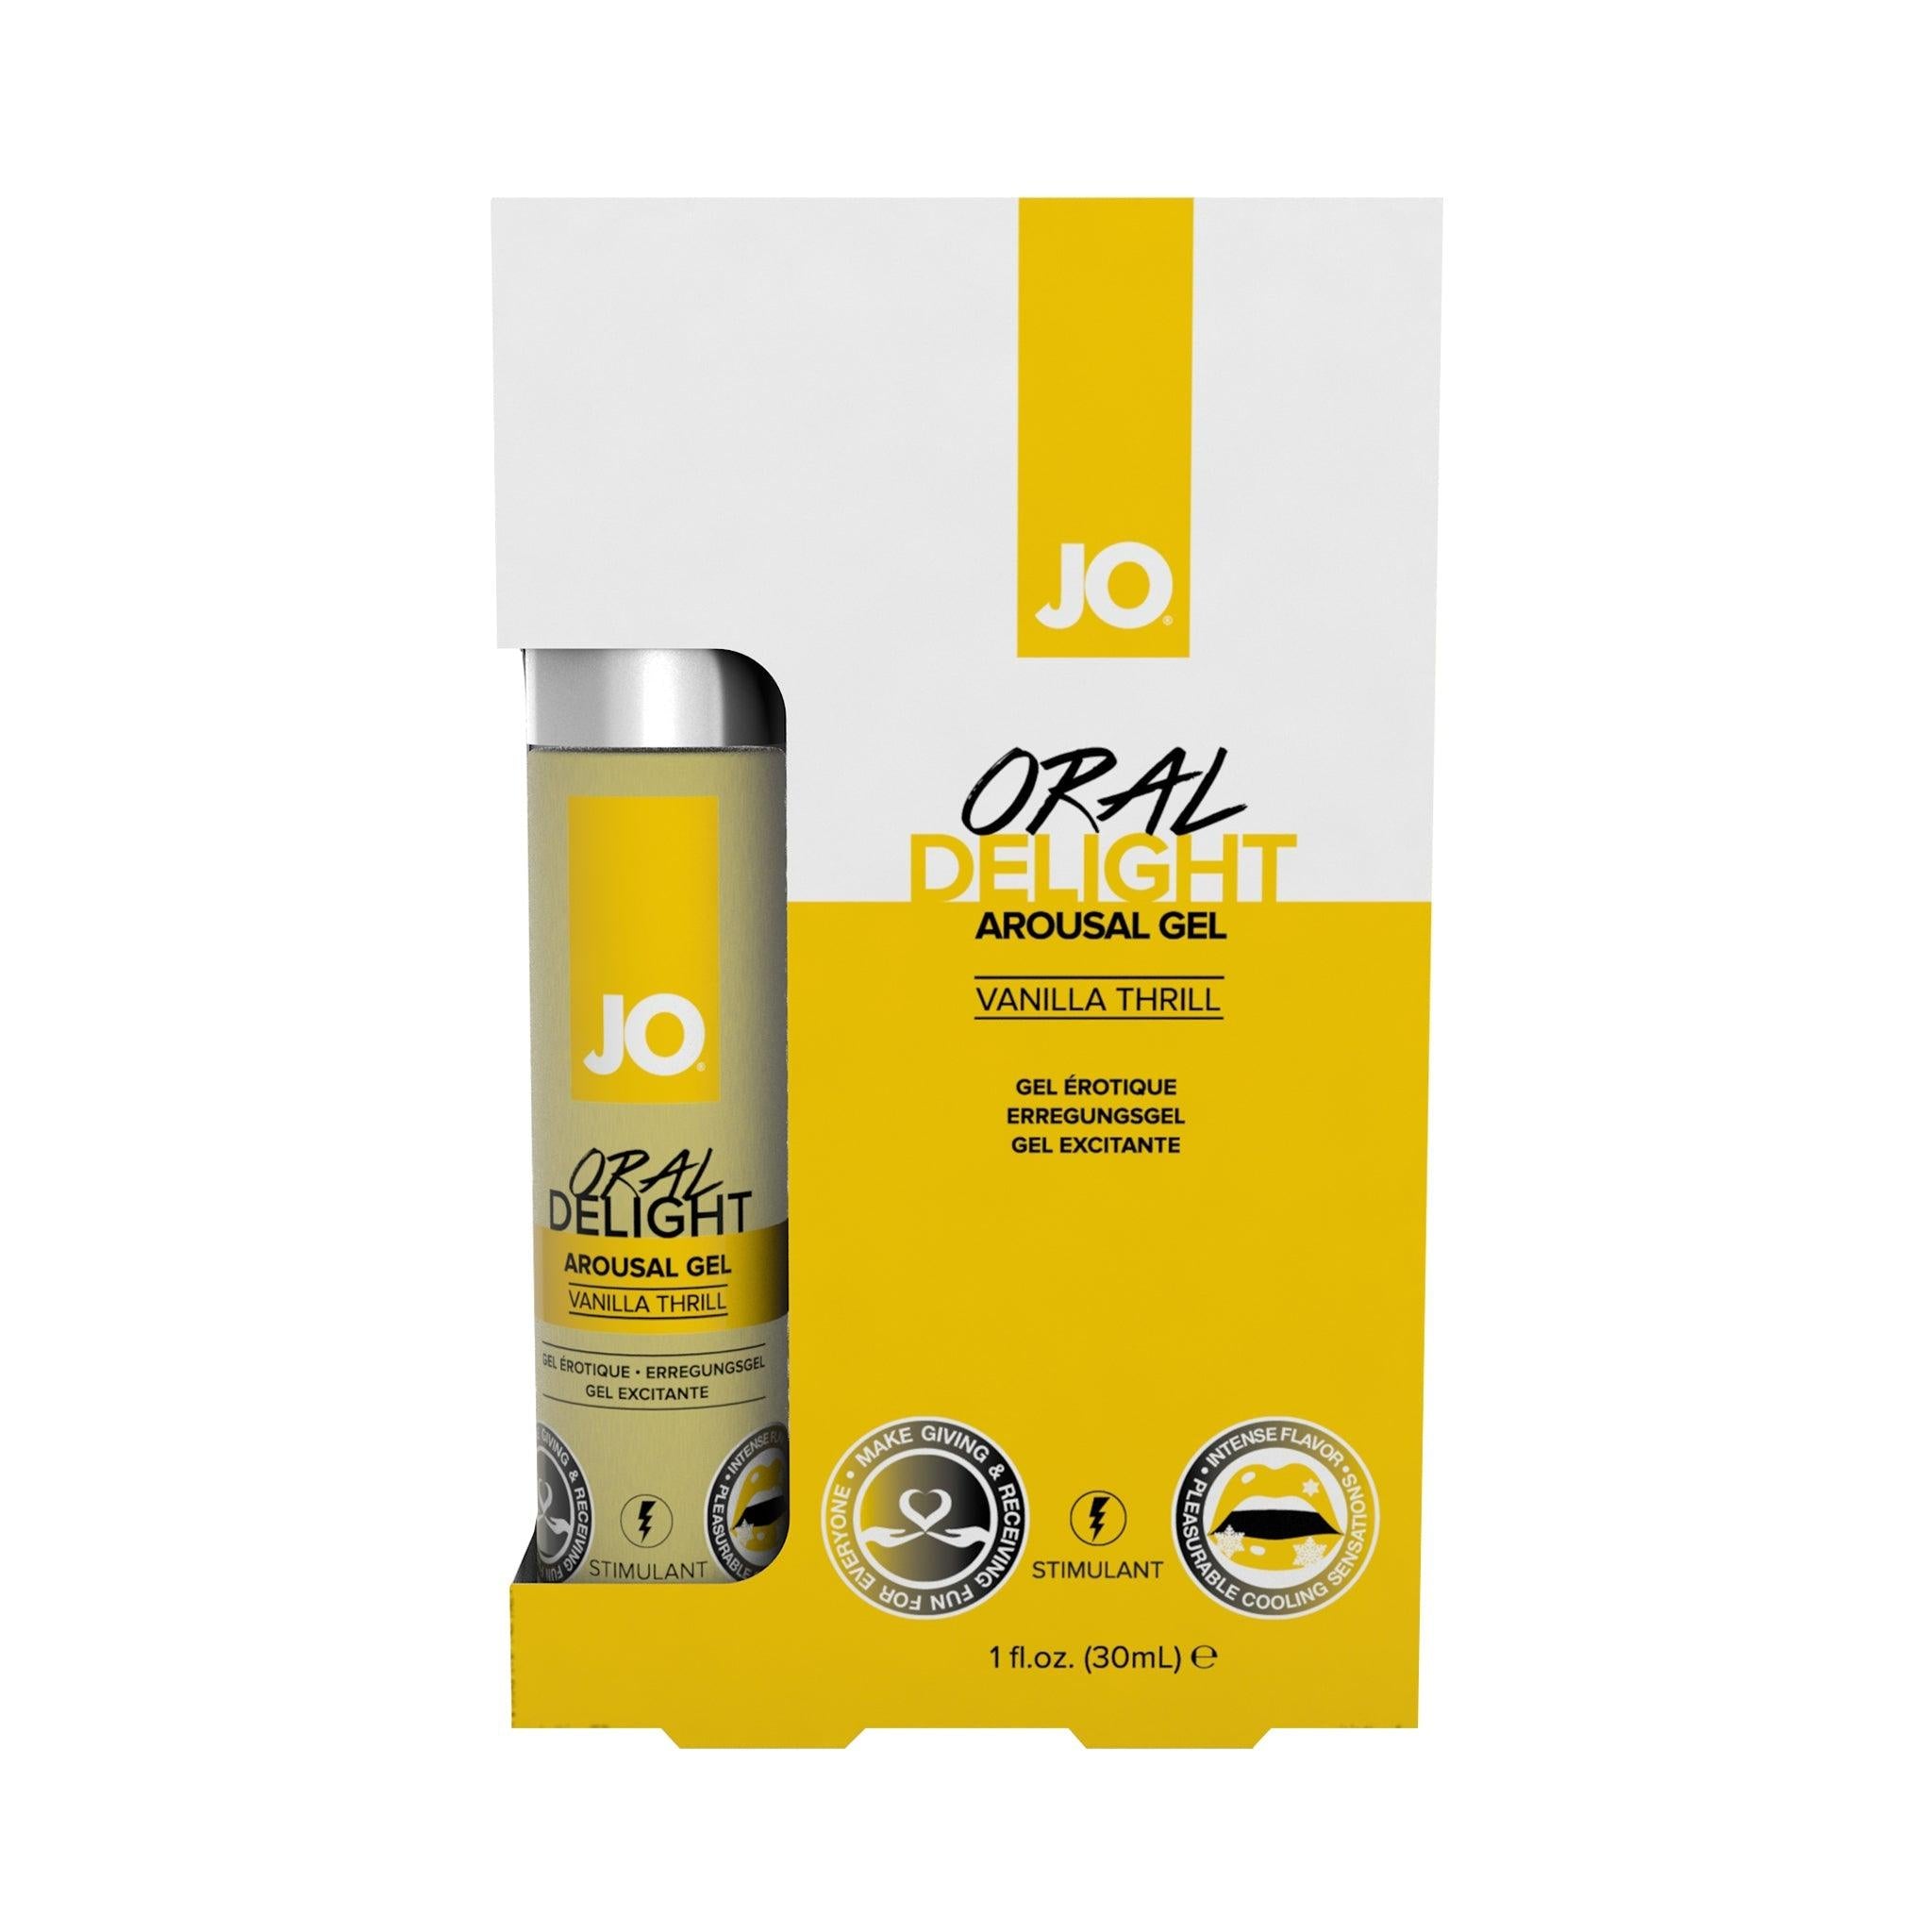 JO ORAL DELIGHT AROUSAL GEL - 2 Flavors Available! - CheapLubes.com